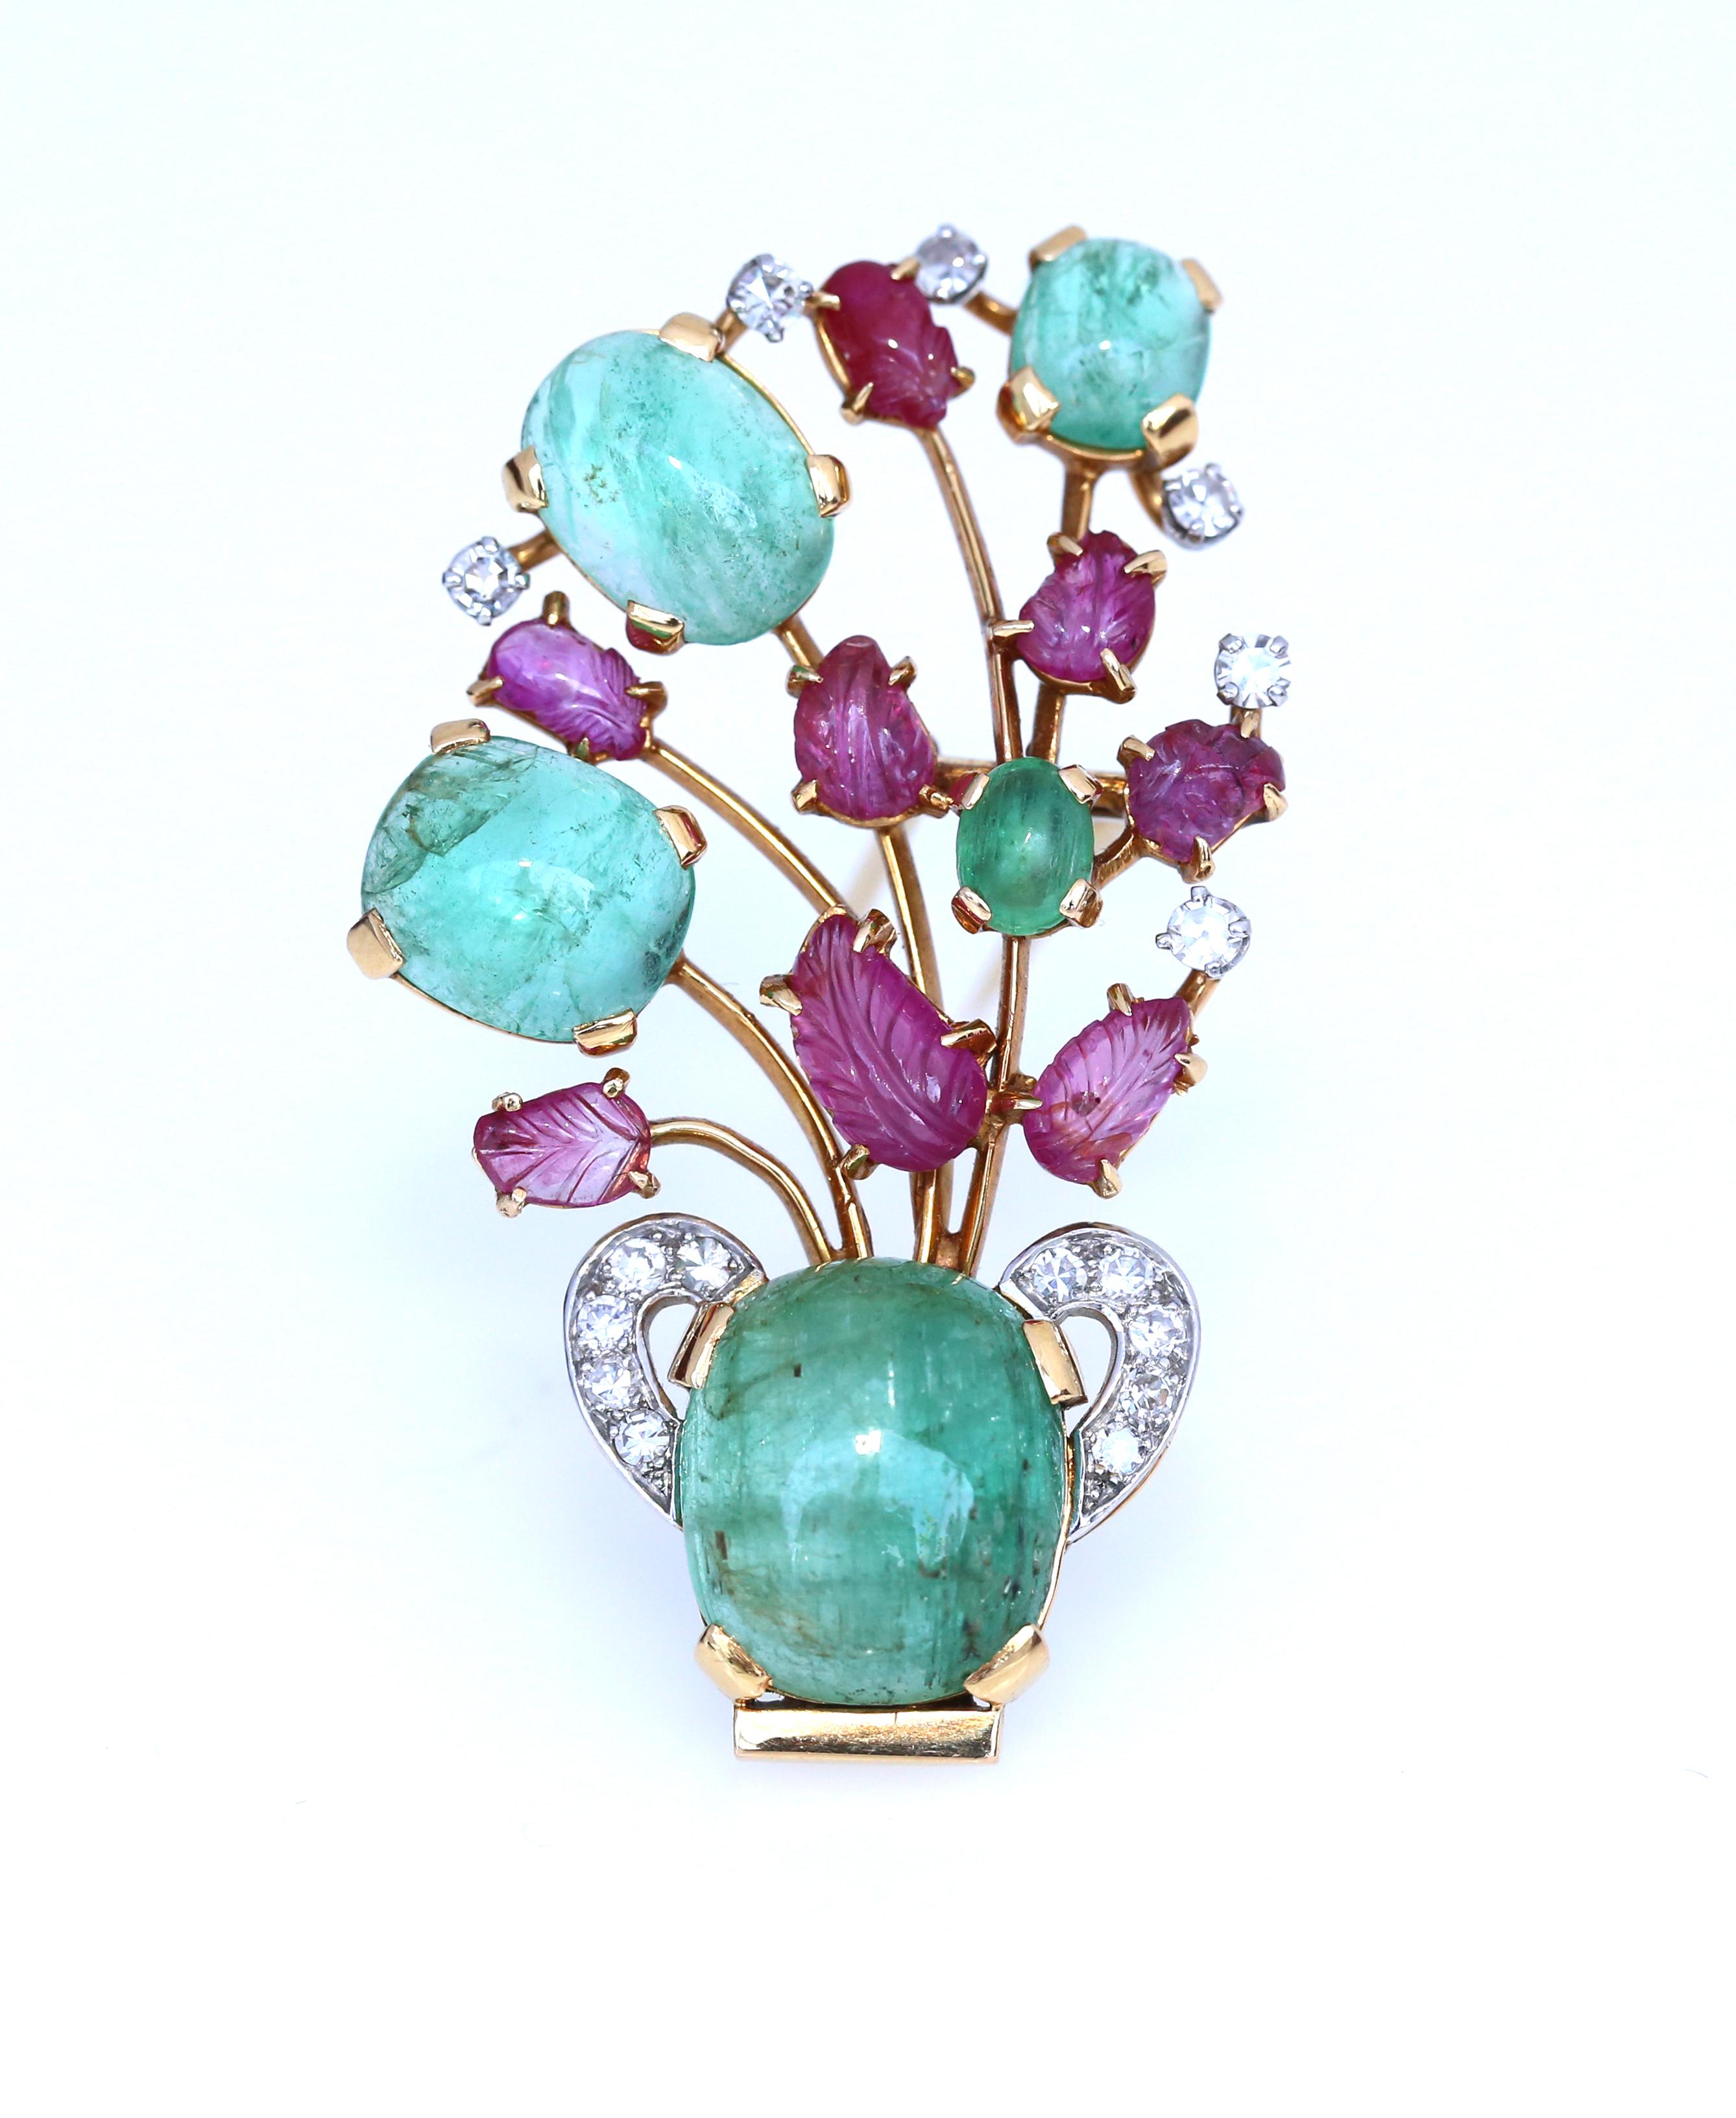 Fine brooch designed as a vase emitting a spray of flowers and set with cabochon Emeralds, carved Rubies and single-cut Diamonds, French assay and maker's marks. 1910. Formerly in the collection of Princess Thérésa Vatchnadzé, Née Beglarian, she